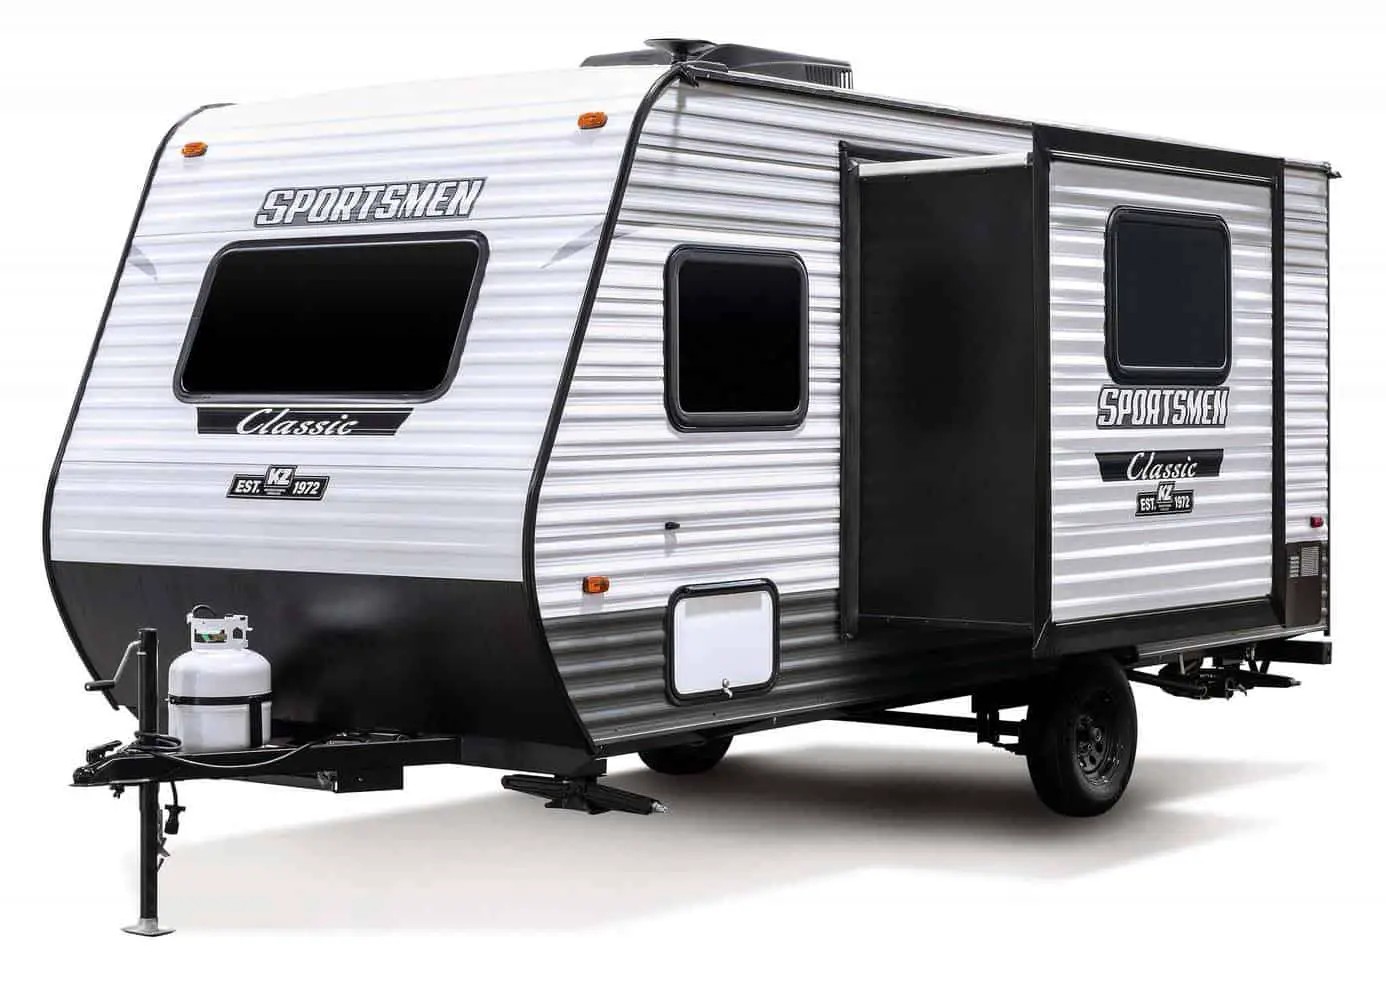 21 Great Small Travel Trailers With Slide Out   Team Camping